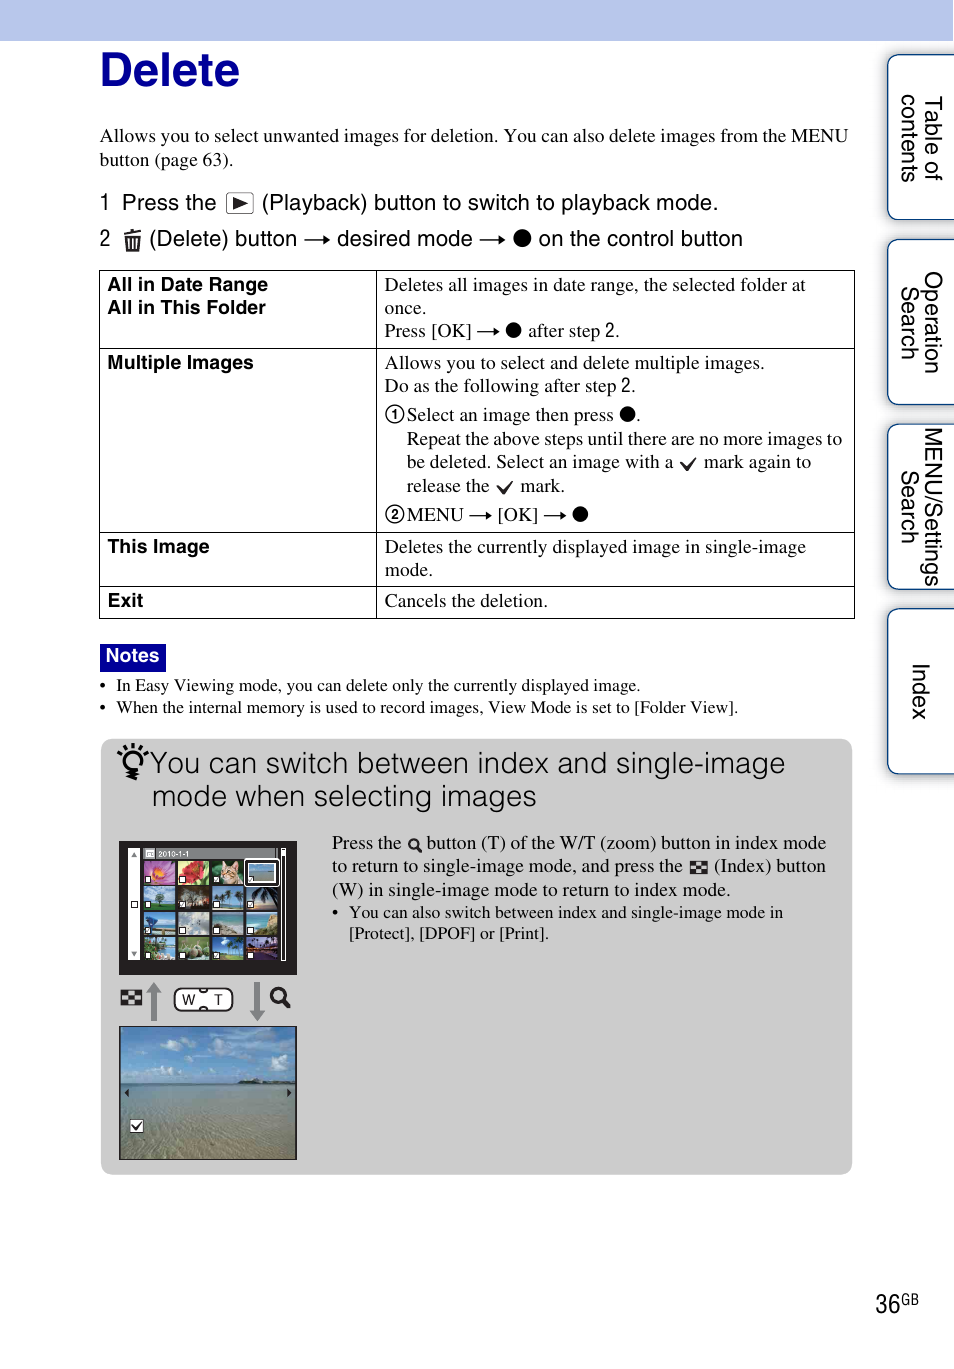 Delete | Sony Cyber-shot 4-176-667-12(1) User Manual | Page 36 / 128